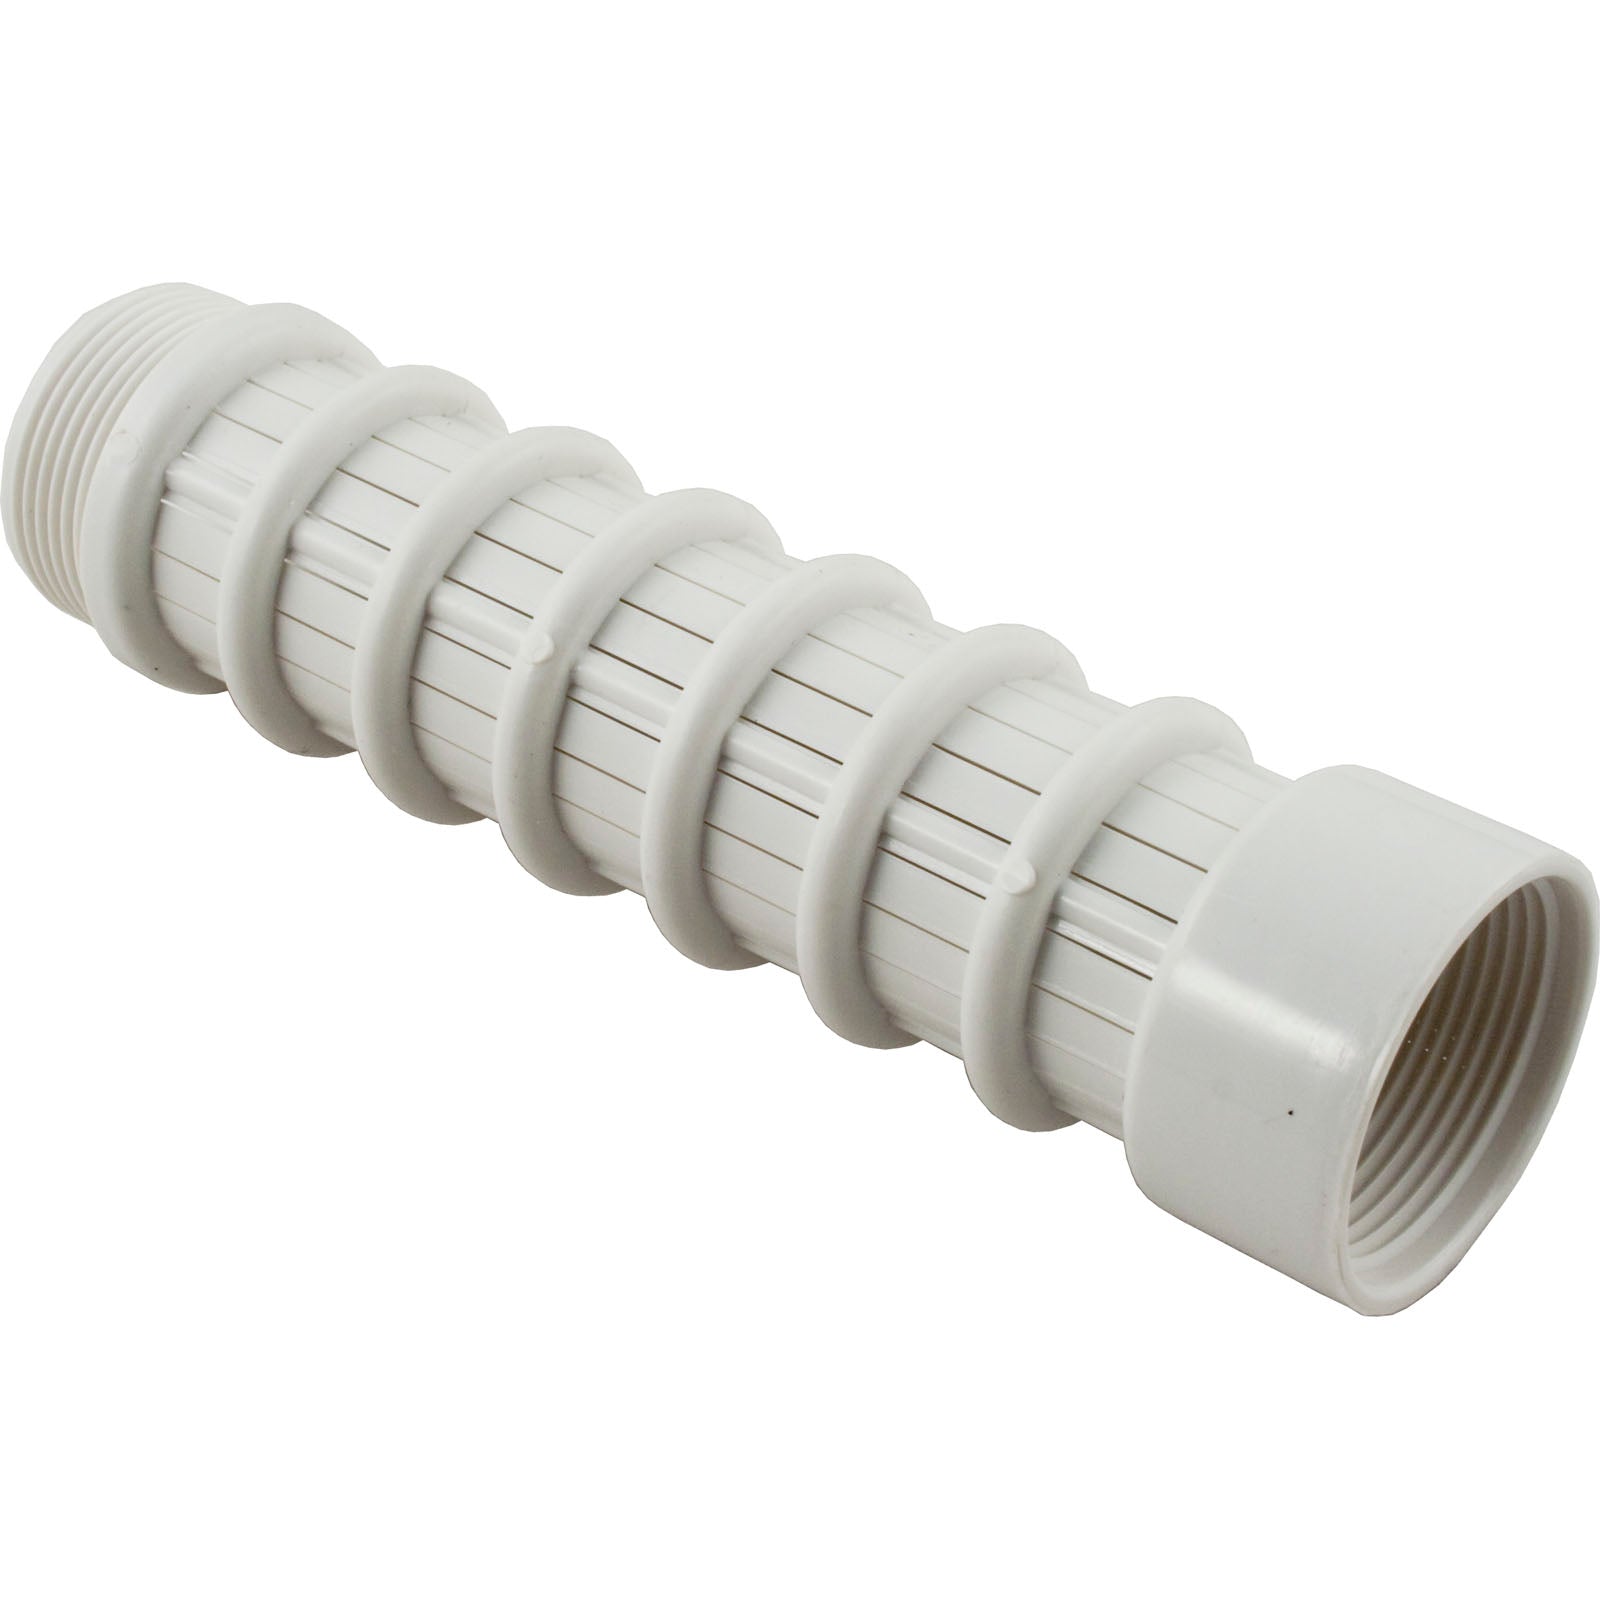 Lateral, Waterco Baker Hydro/Micron/Thermoplastic, 5-1/2"  W02113PP